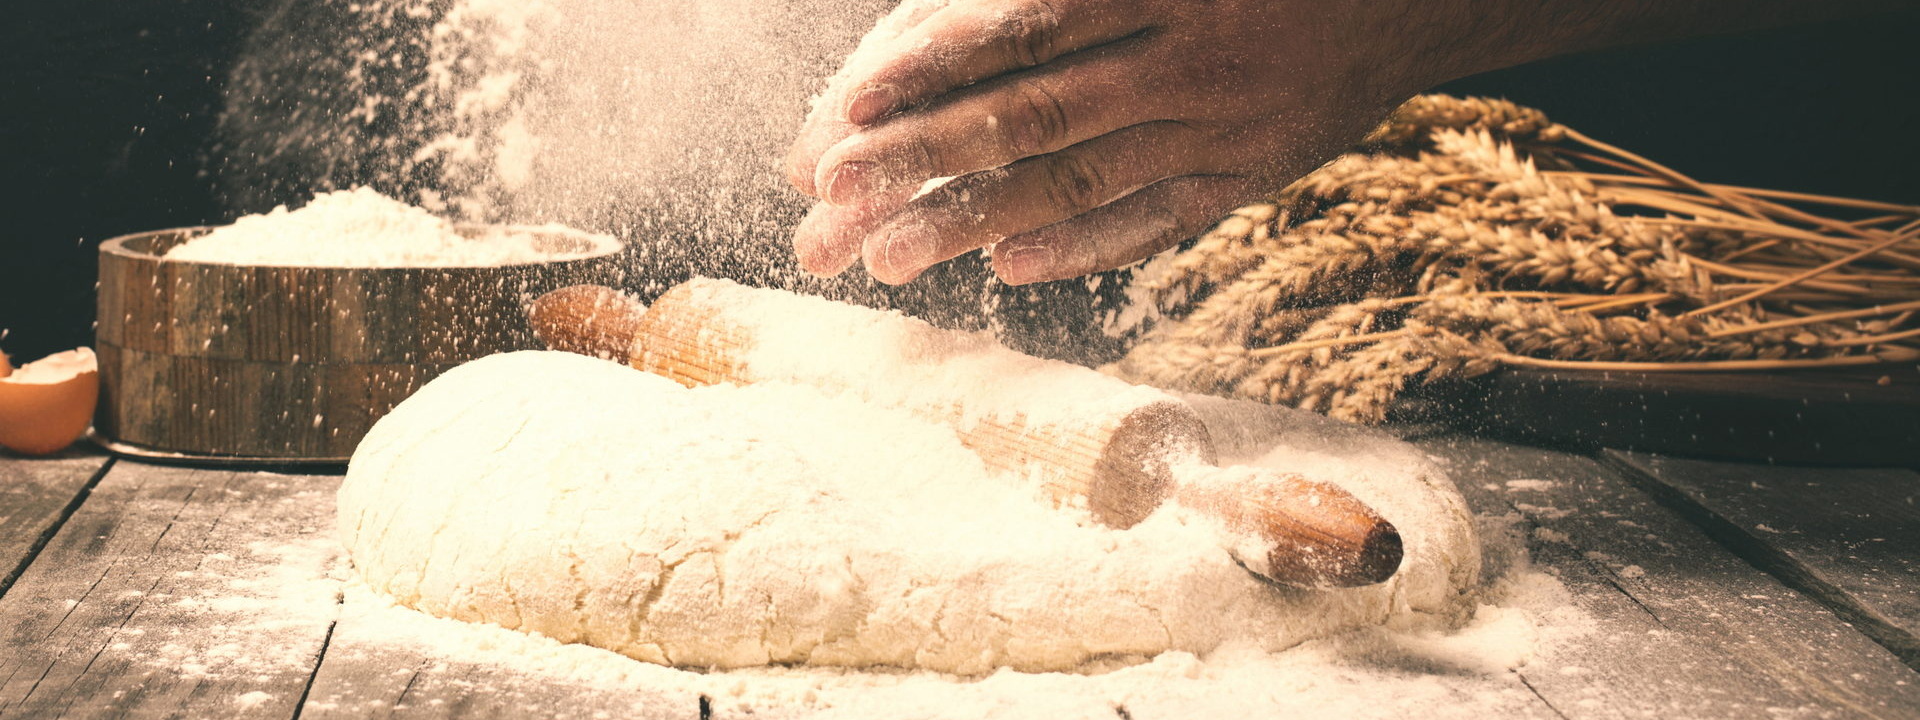 Man,Preparing,Bread,Dough,On,Wooden,Table,In,A,Bakery